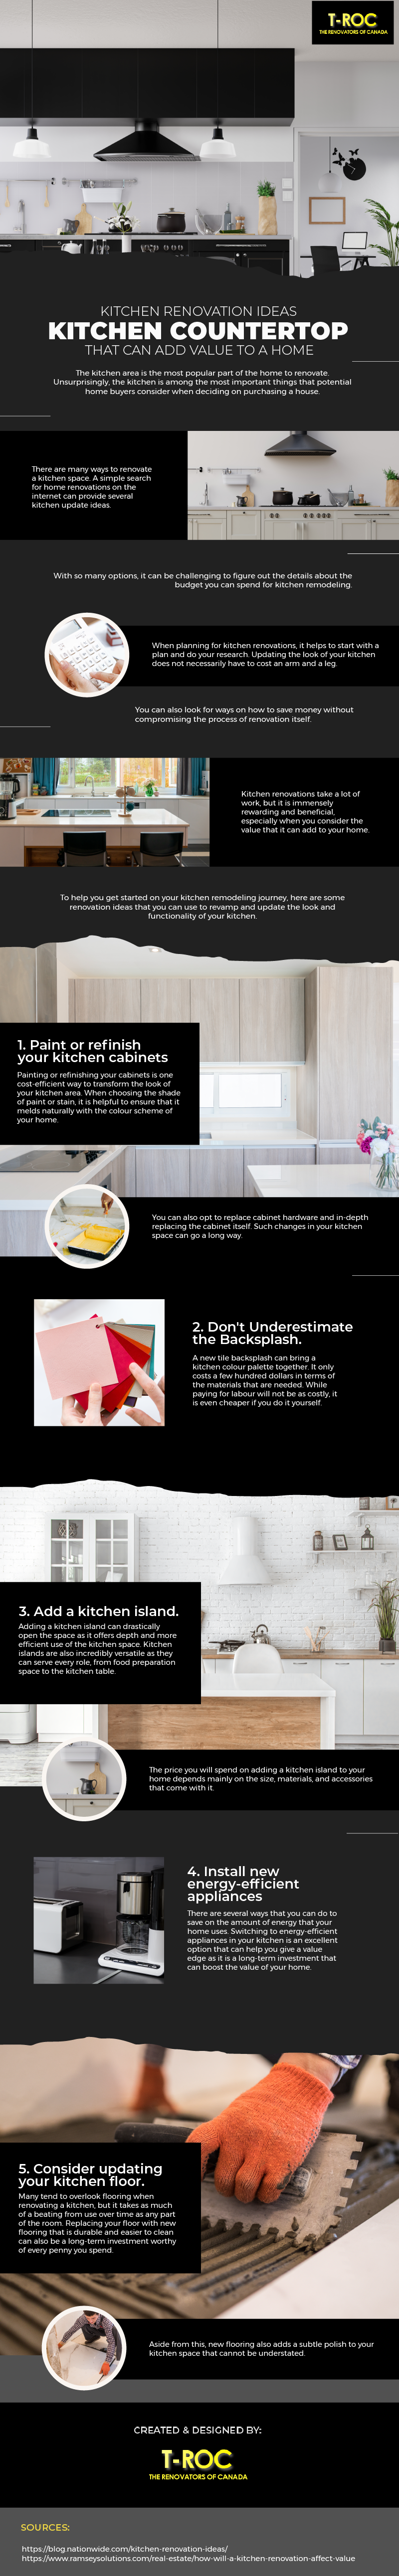 Kitchen Renovation Ideas That Can Add Value to A Home(infographic)